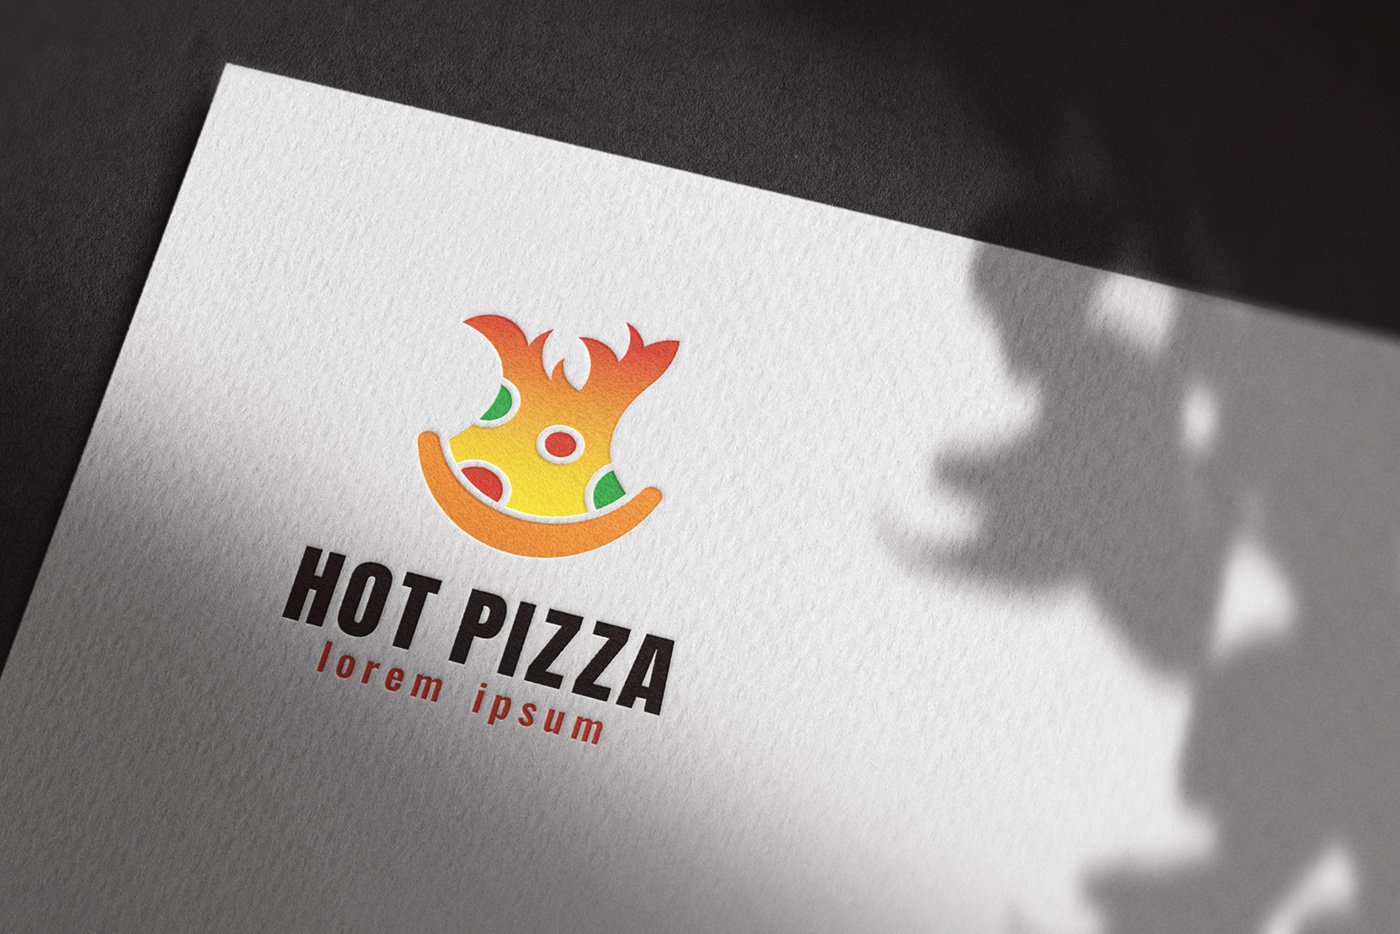 Hot Pizza Restaurant Logo Template cover image.